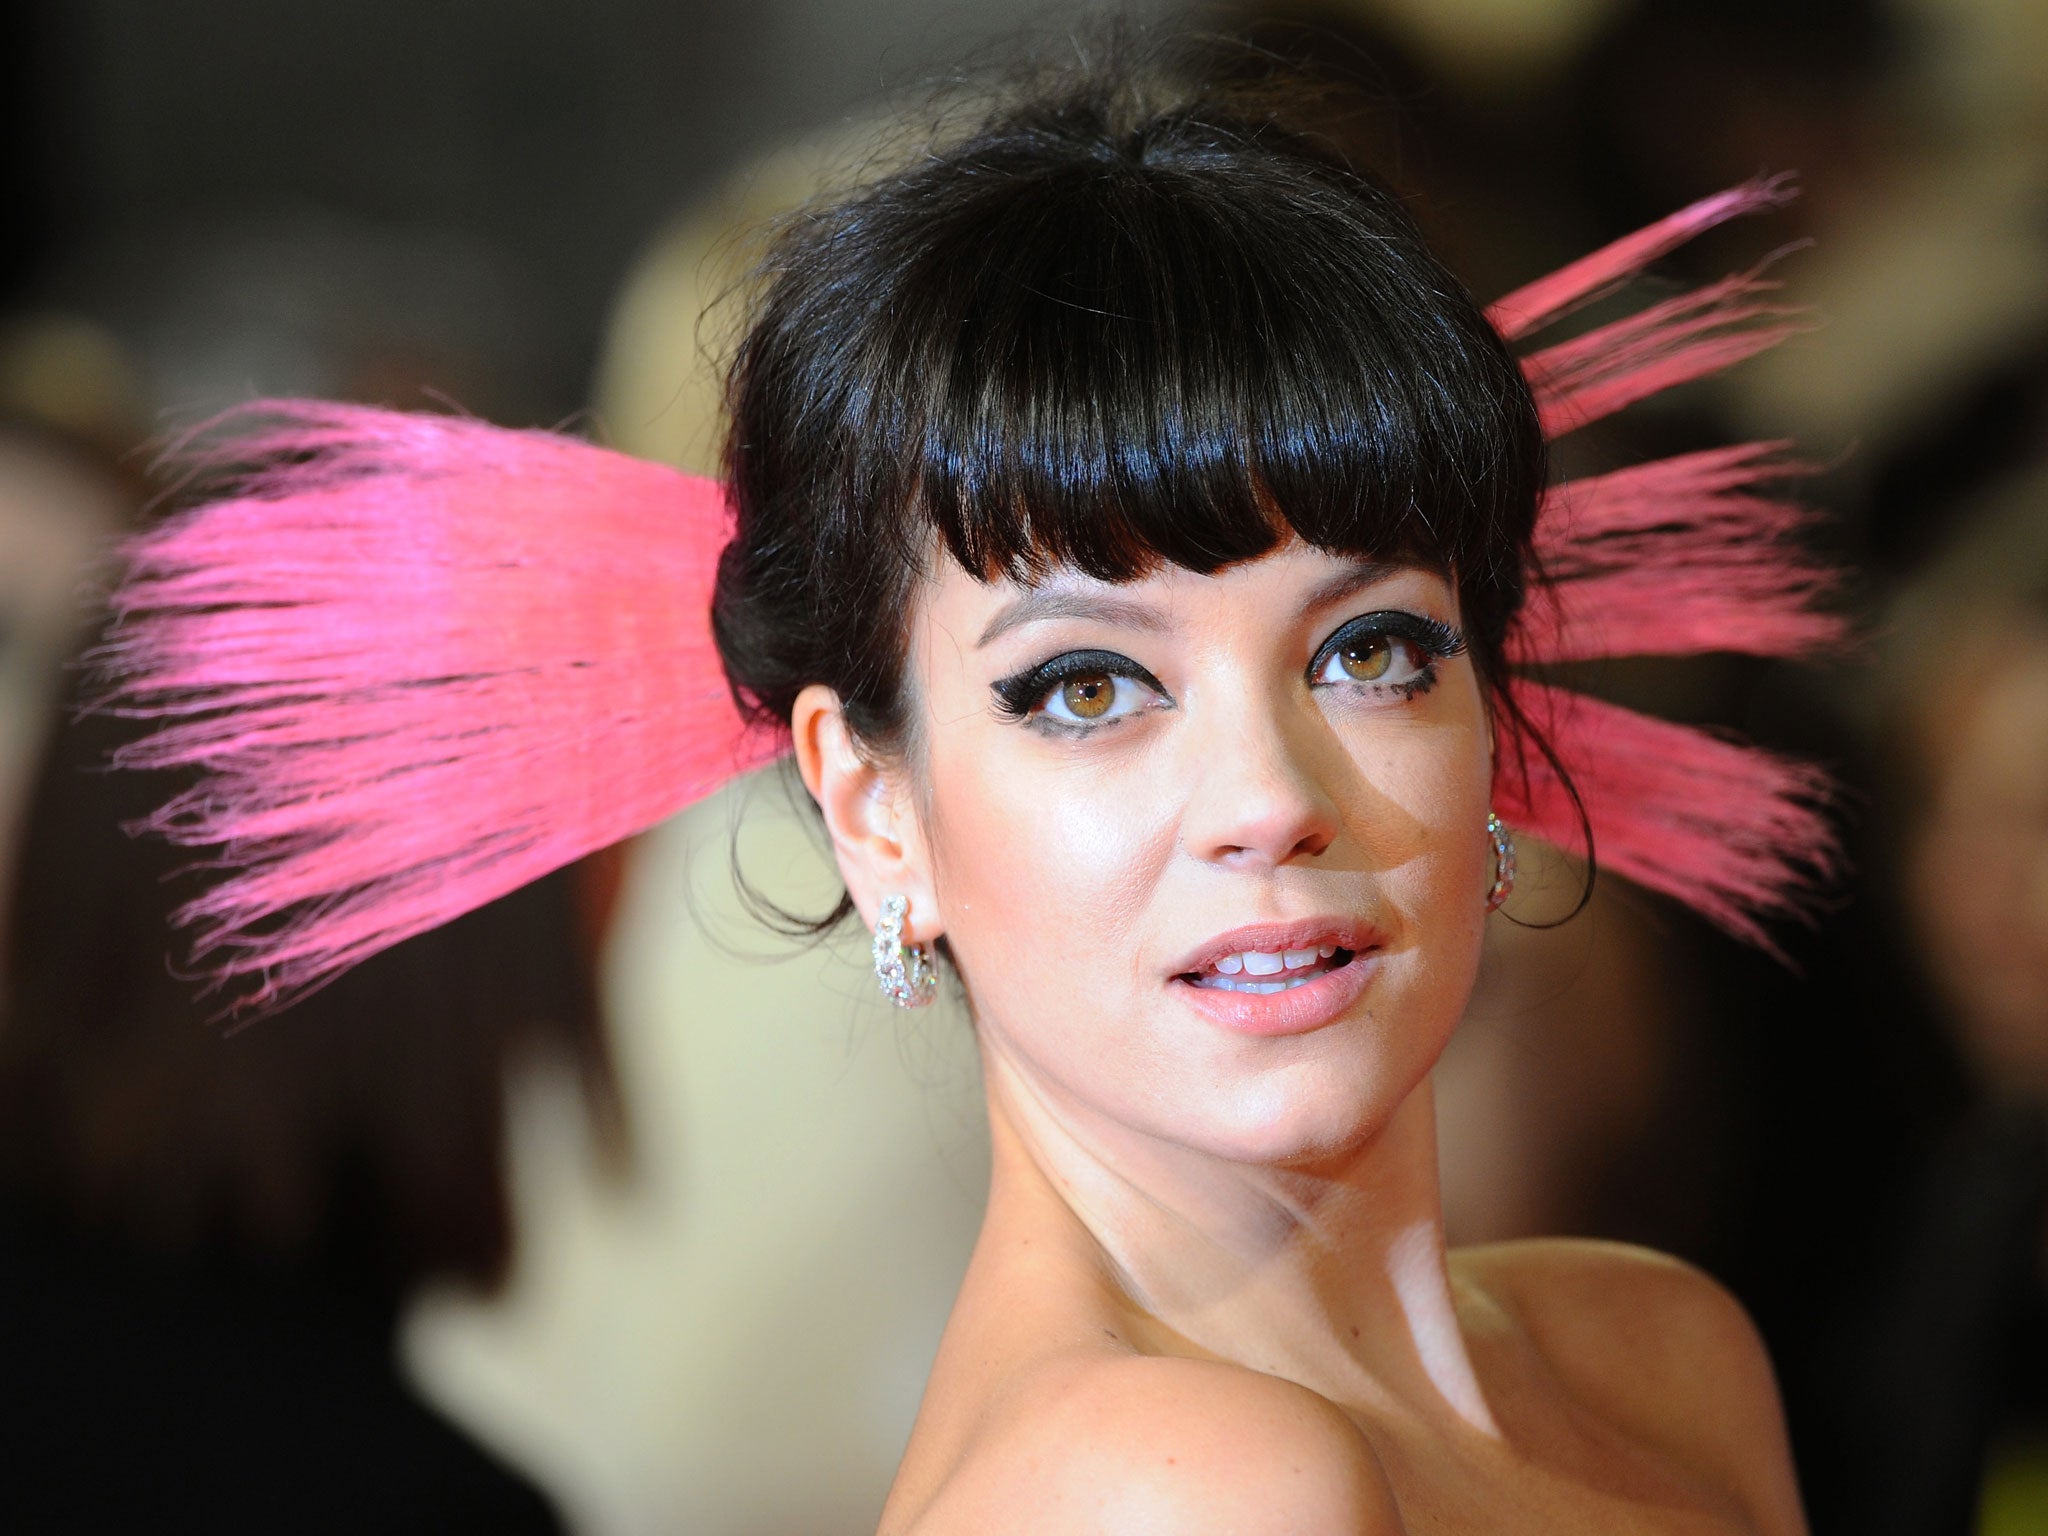 Motherhood and time away from the industry haven’t blunted Lily Allen’s lyrical instincts